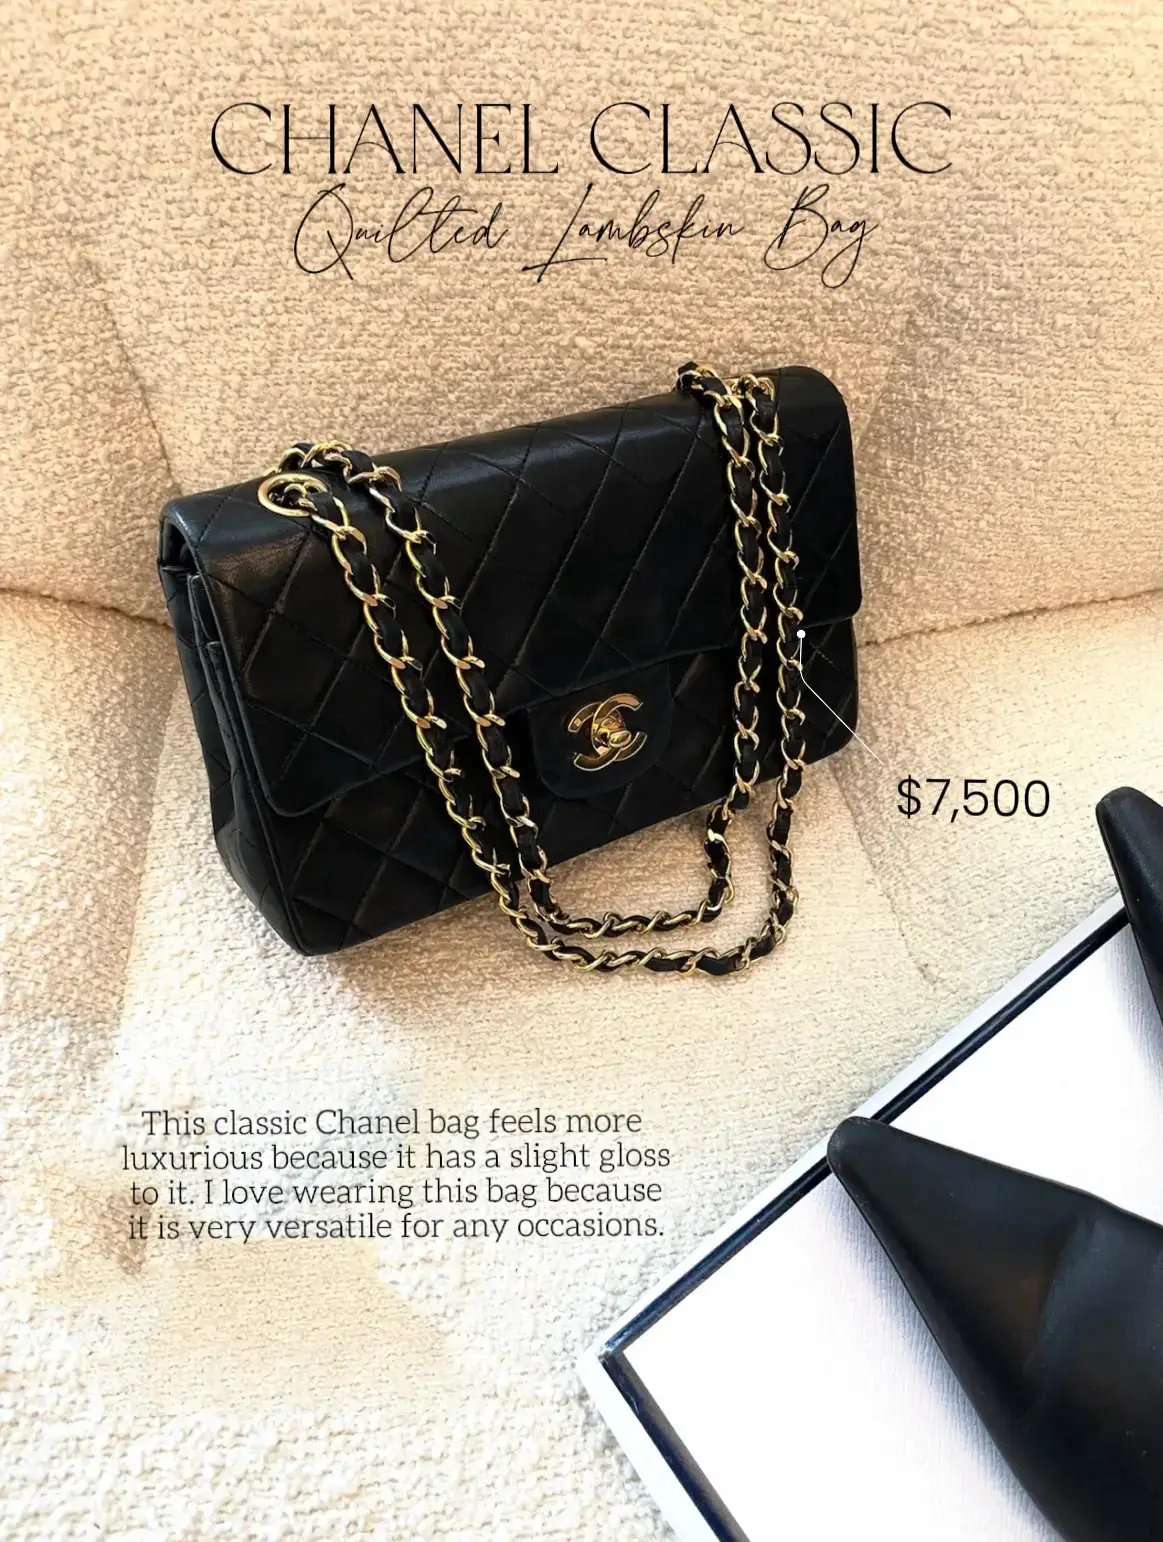 MY 5 FAVORITE CHANEL BAG, Gallery posted by Jane Allyssa